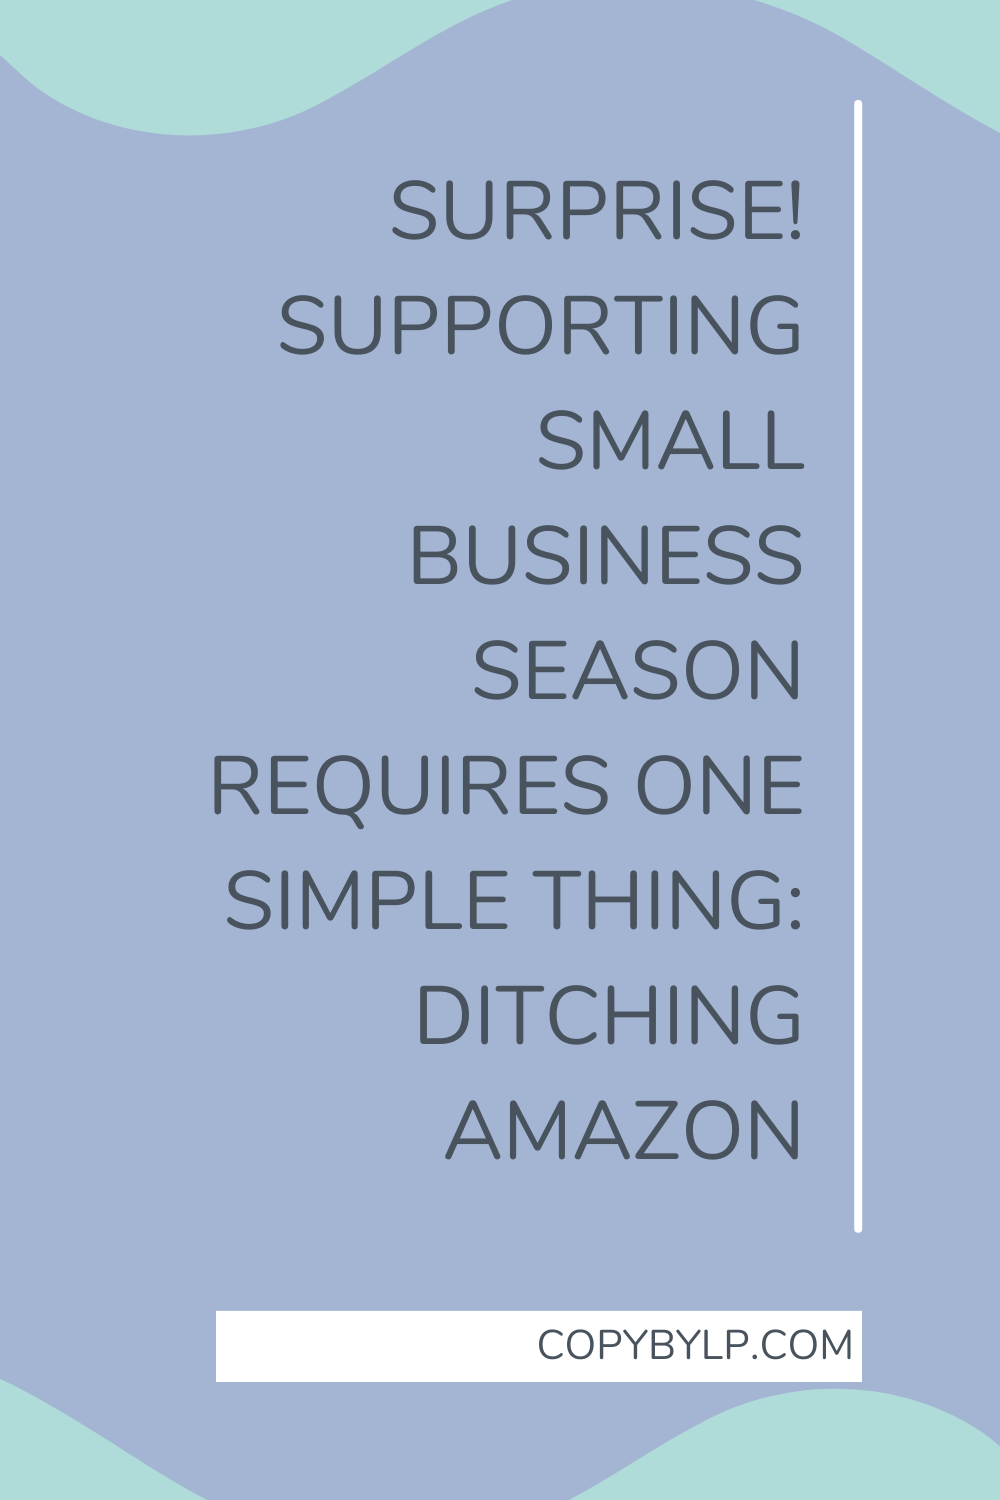 Surprise! Supporting Small Business Season Requires One Simple Thing: Ditching Amazon - blog title graphic